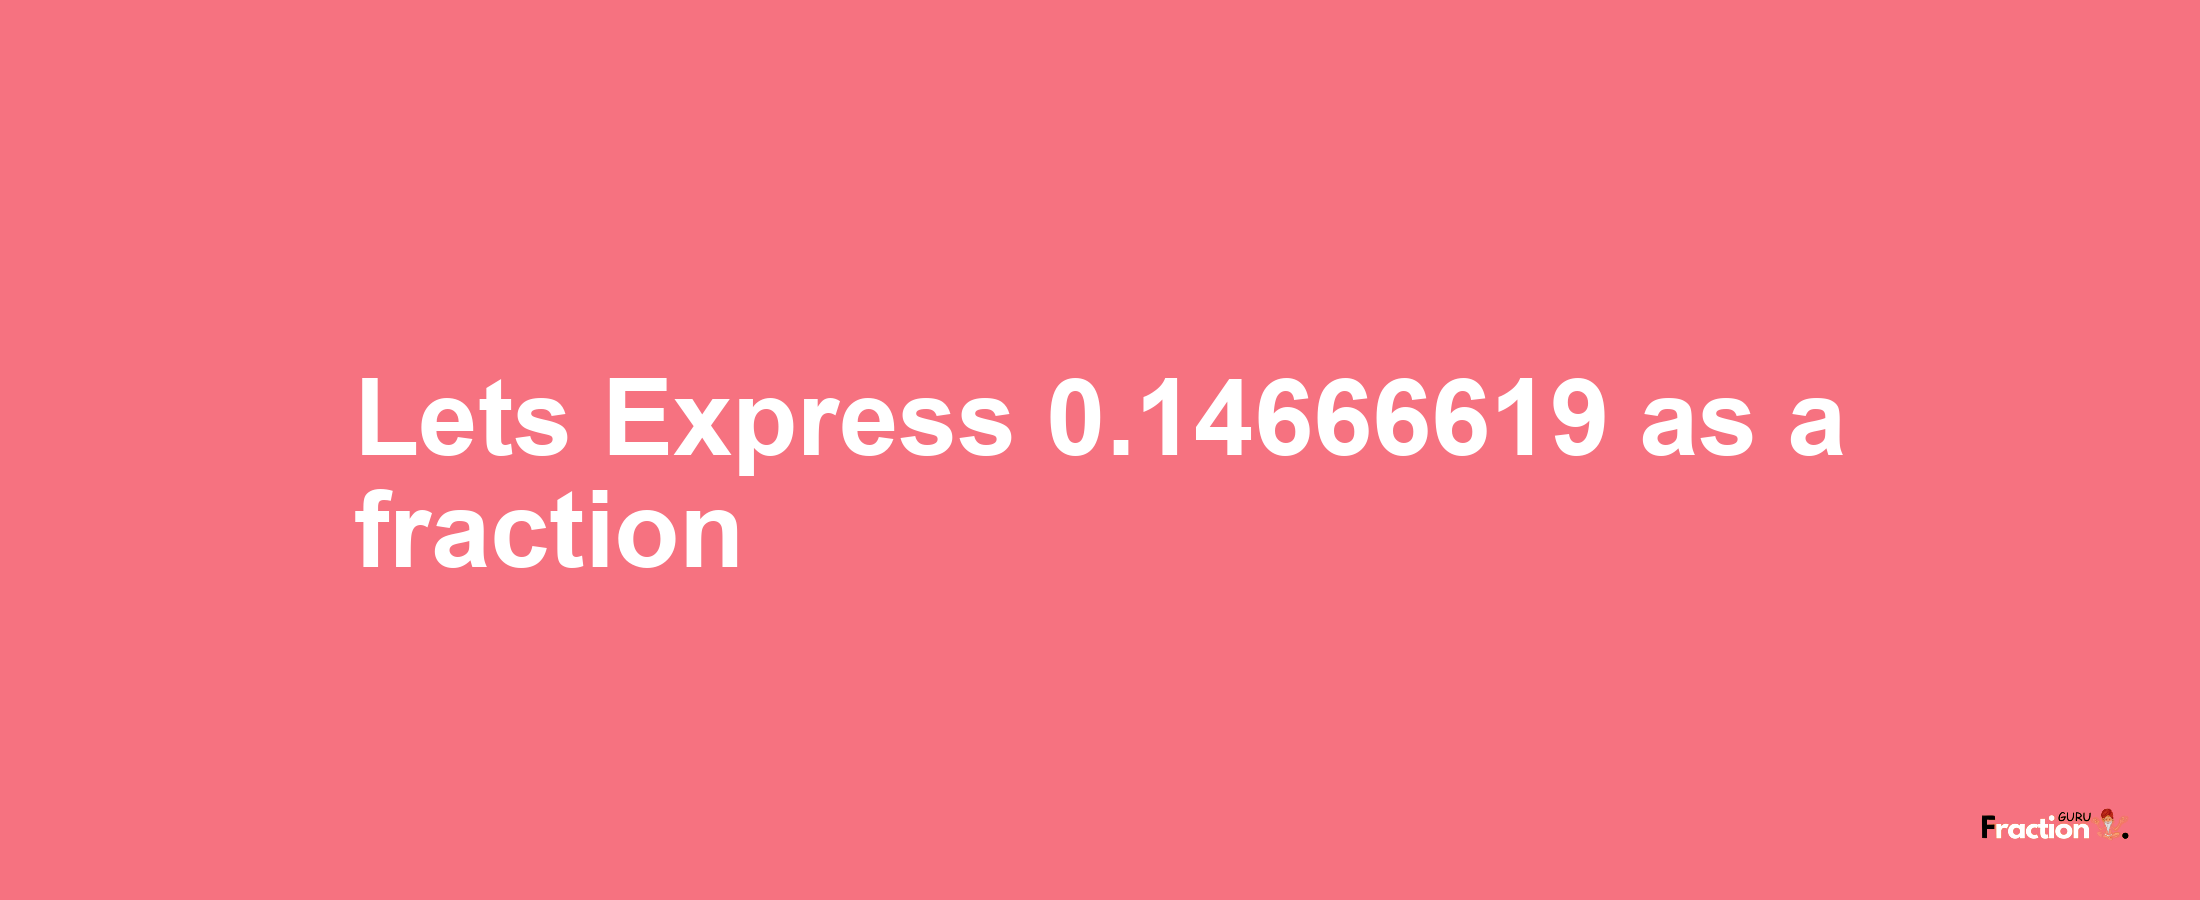 Lets Express 0.14666619 as afraction